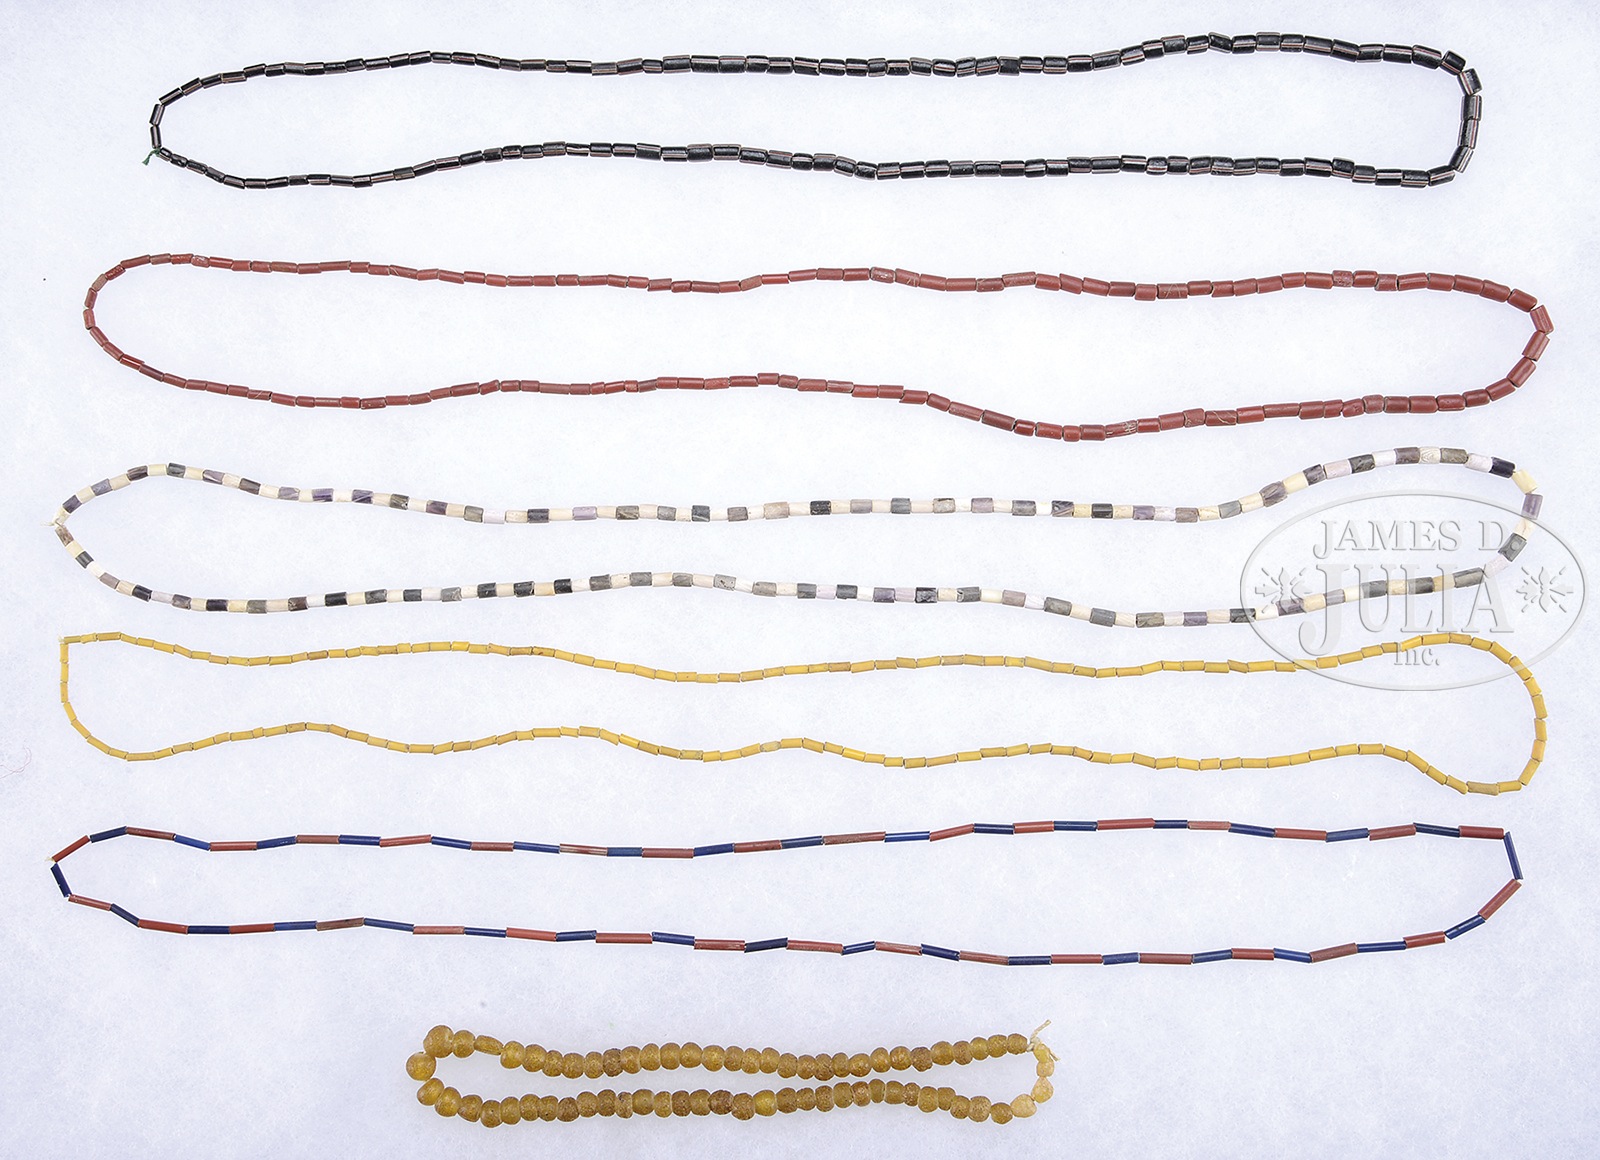 LARGE GROUPING OF EXCAVATED INDIAN TRADE BEADS, WAMPUM AND TRADE AXES. This grouping from the the